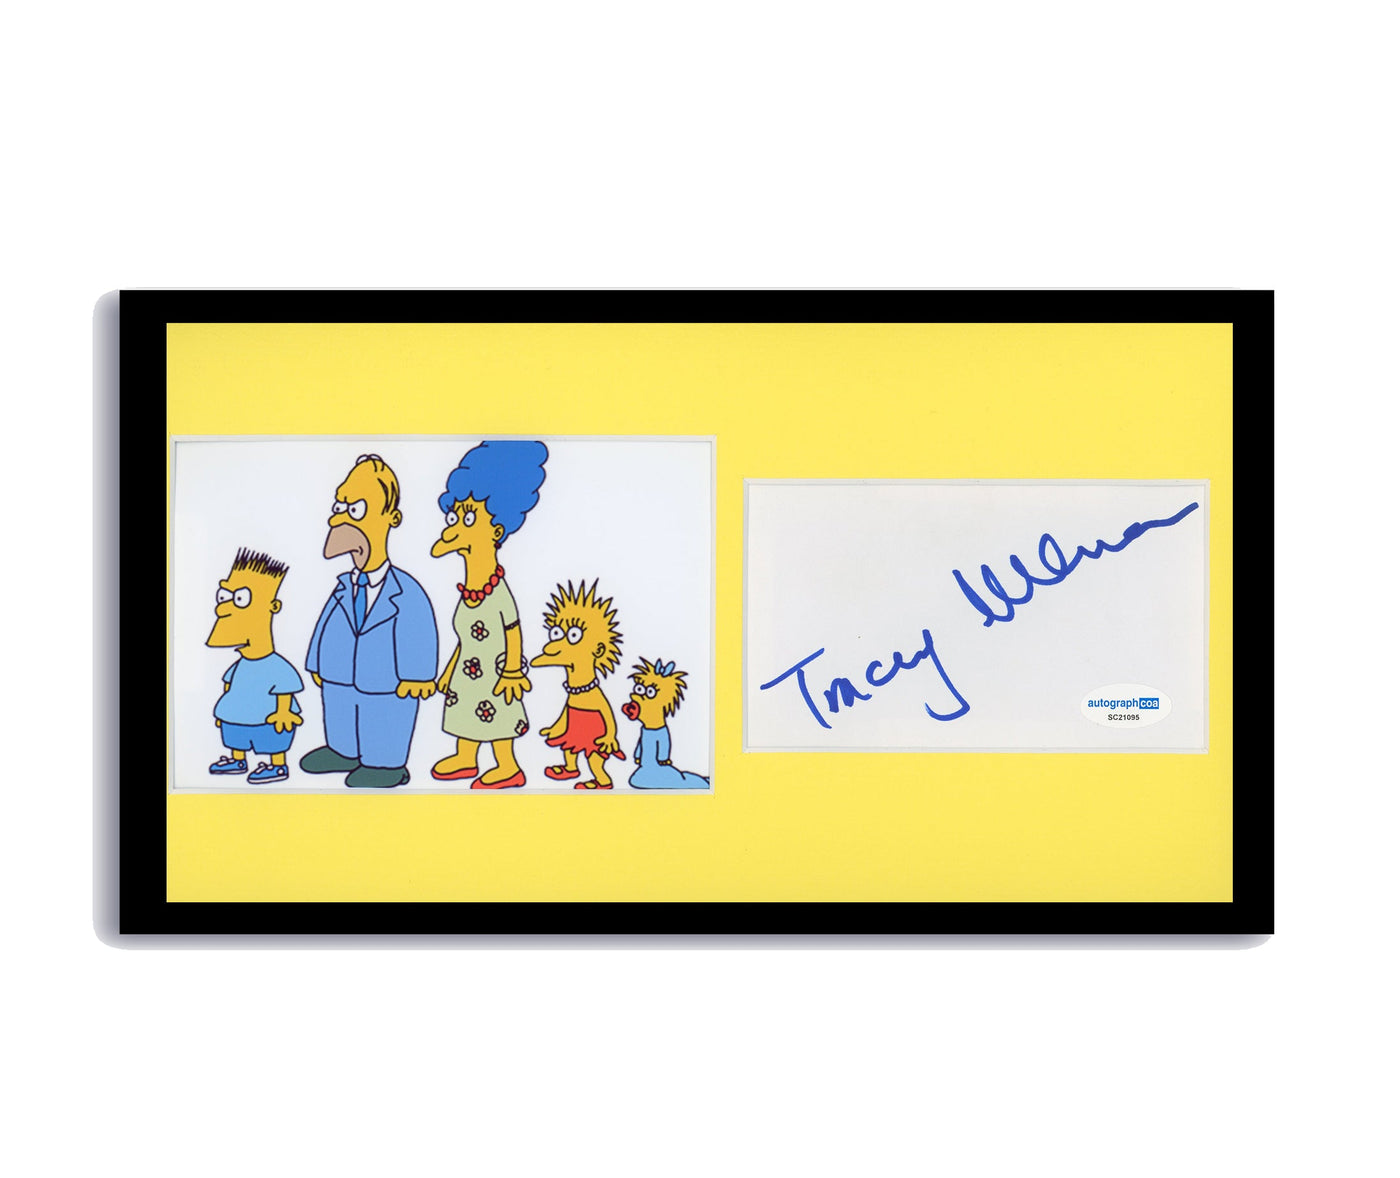 Tracey Ullman Signed 7x12 The Simpsons Shorts Autographed AutographCOA